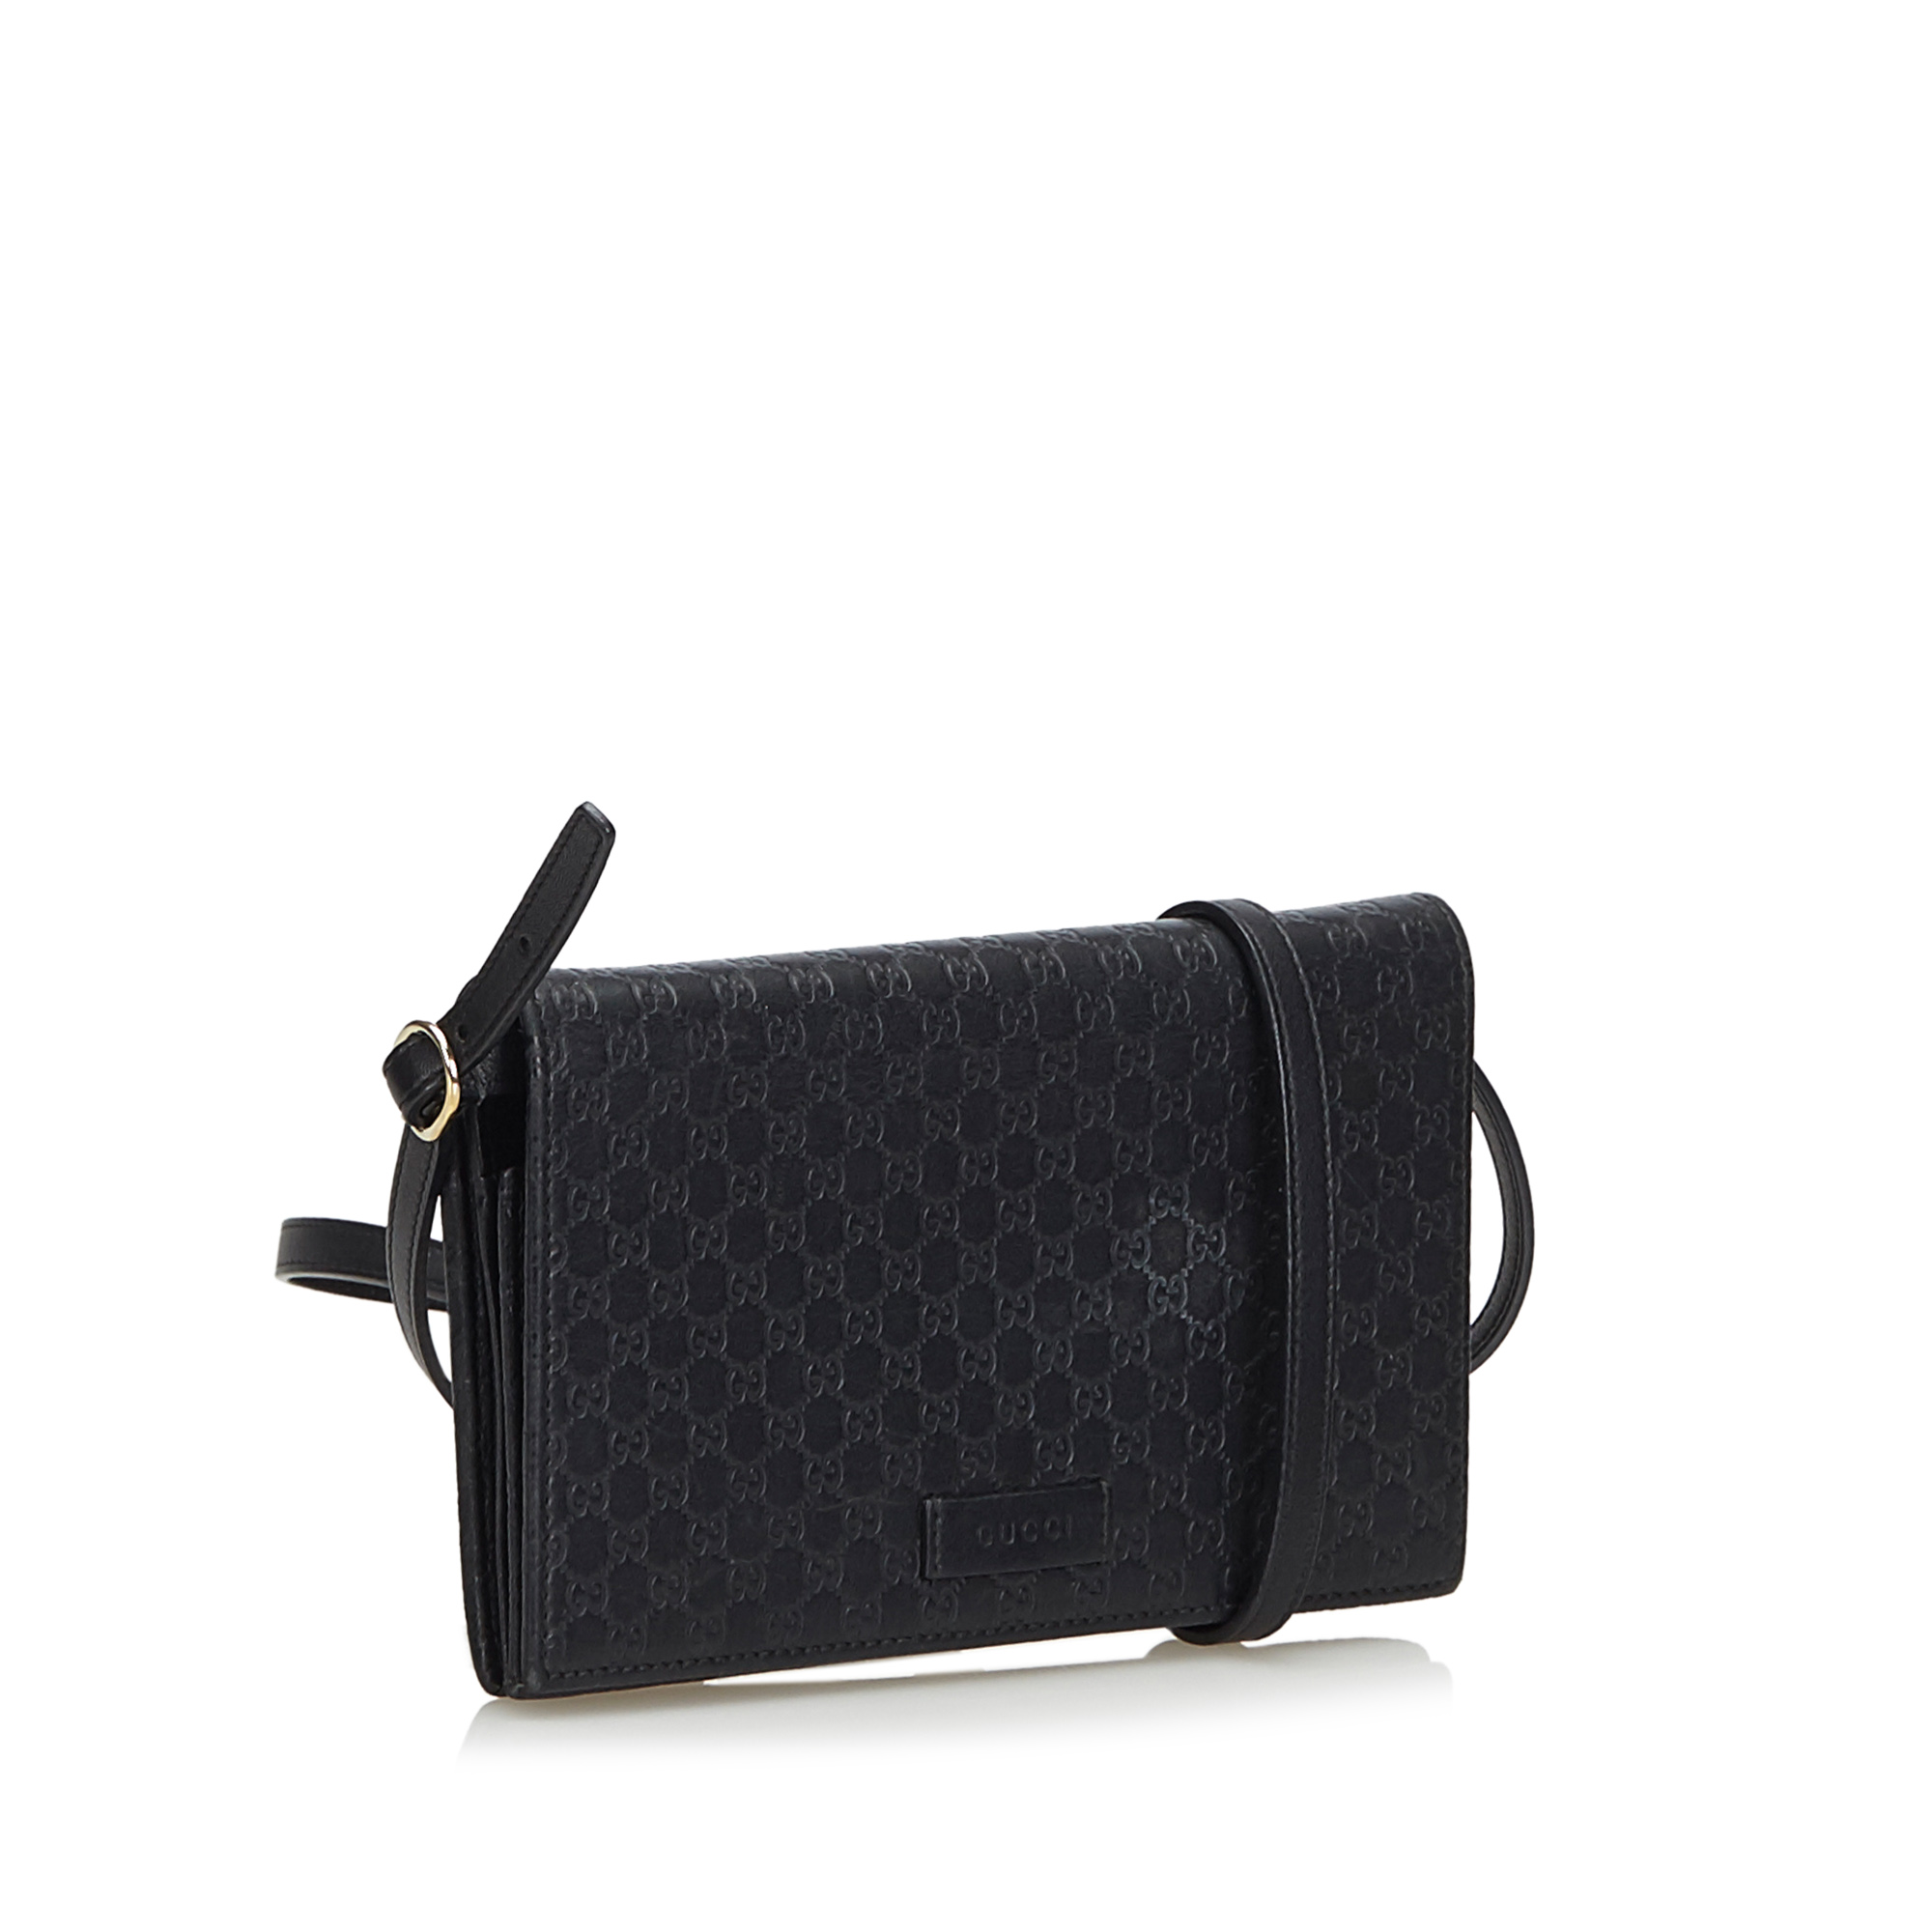 Gucci Microguccissima Long Wallet on Strap - Image 12 of 12